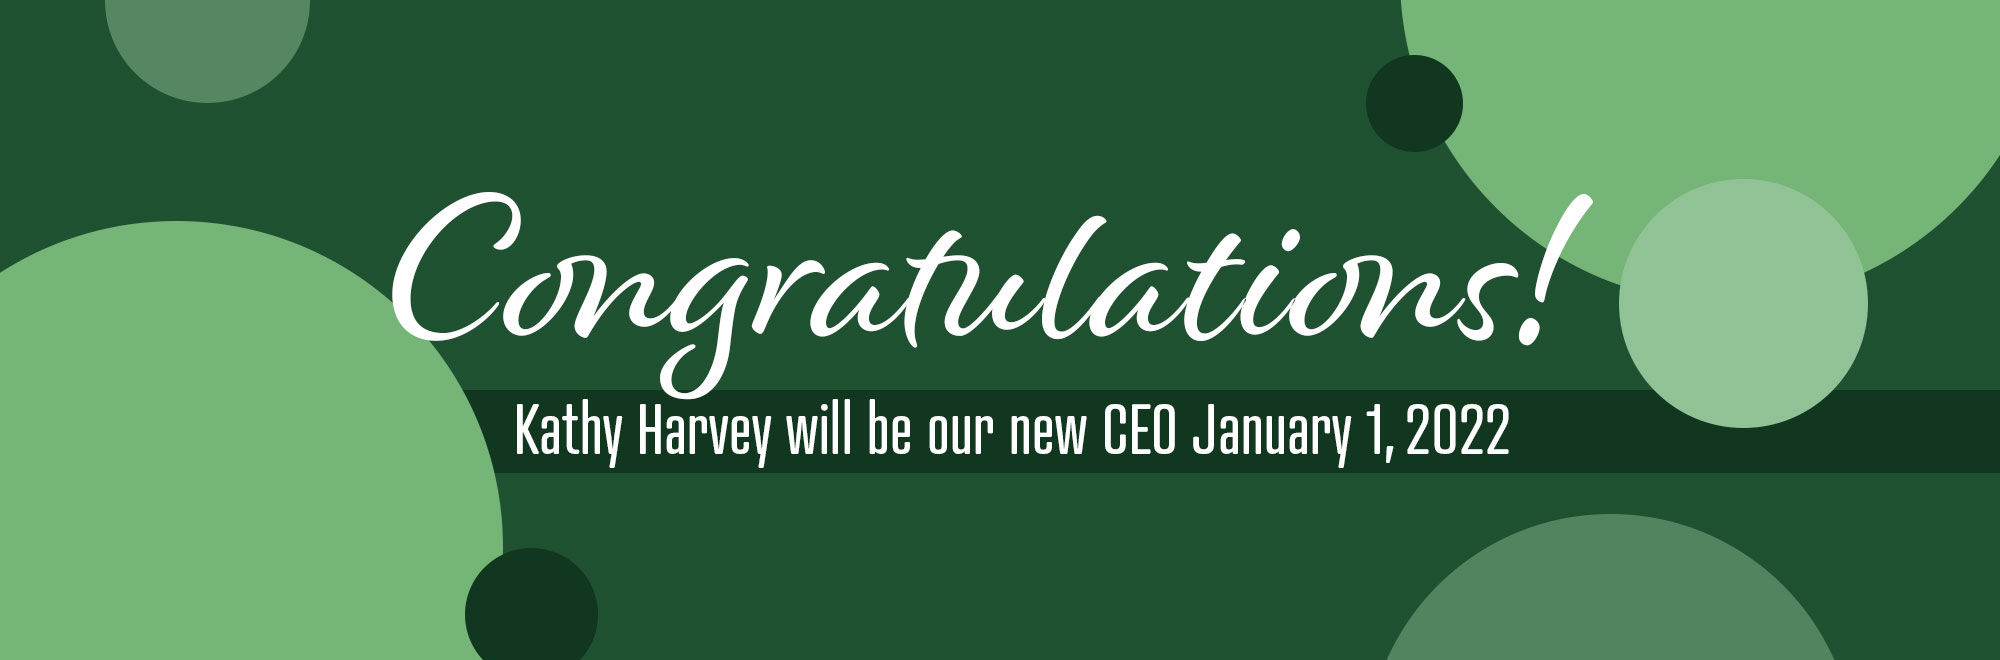 Congrats! Kathy will be the new CEO at southlandFCU starting January 1st!